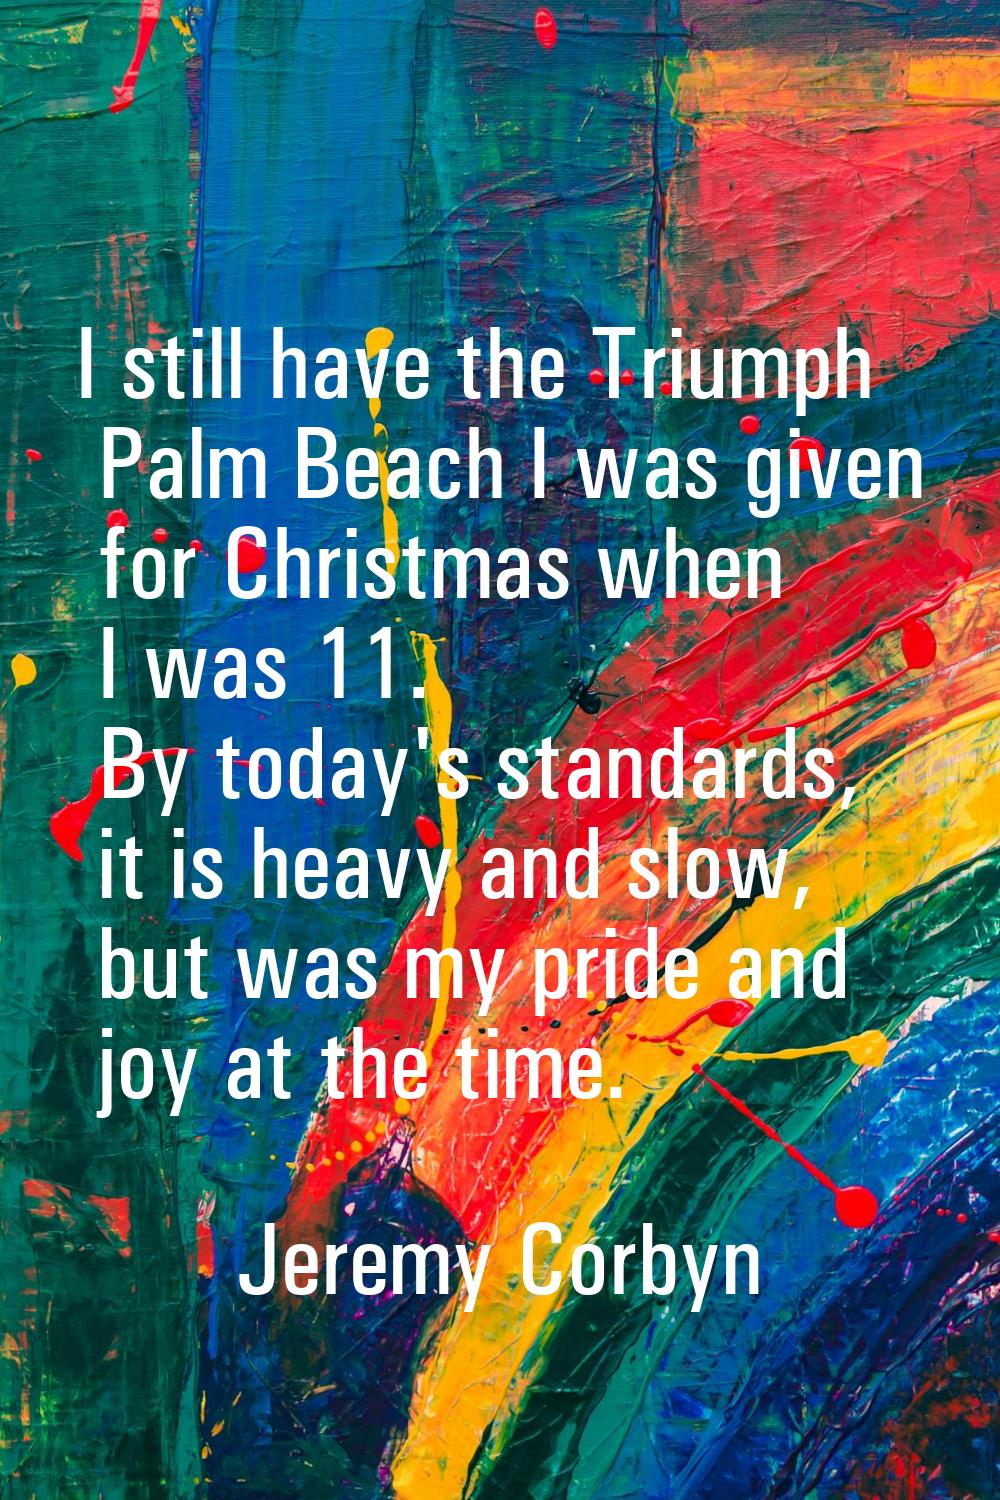 I still have the Triumph Palm Beach I was given for Christmas when I was 11. By today's standards, 